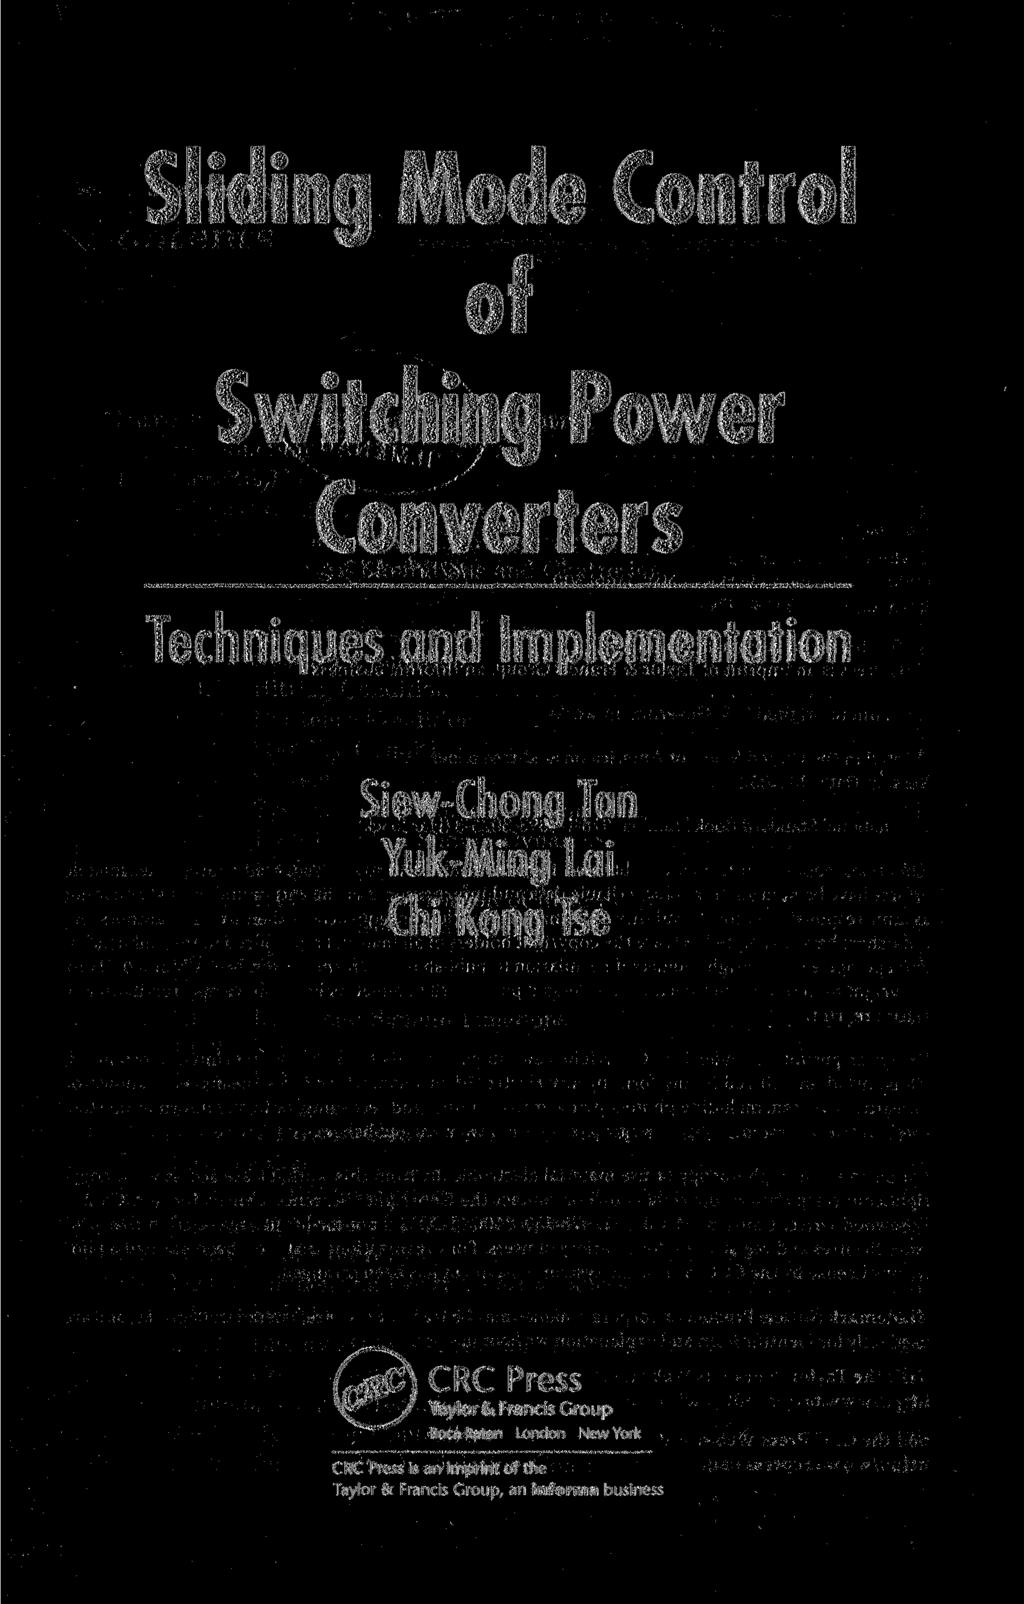 Sliding Mode Control of Switching Power Converters Techniques and Implementation Siew-Chong Tan Yuk-Ming Lai Chi Kong Tse Lap) CRC